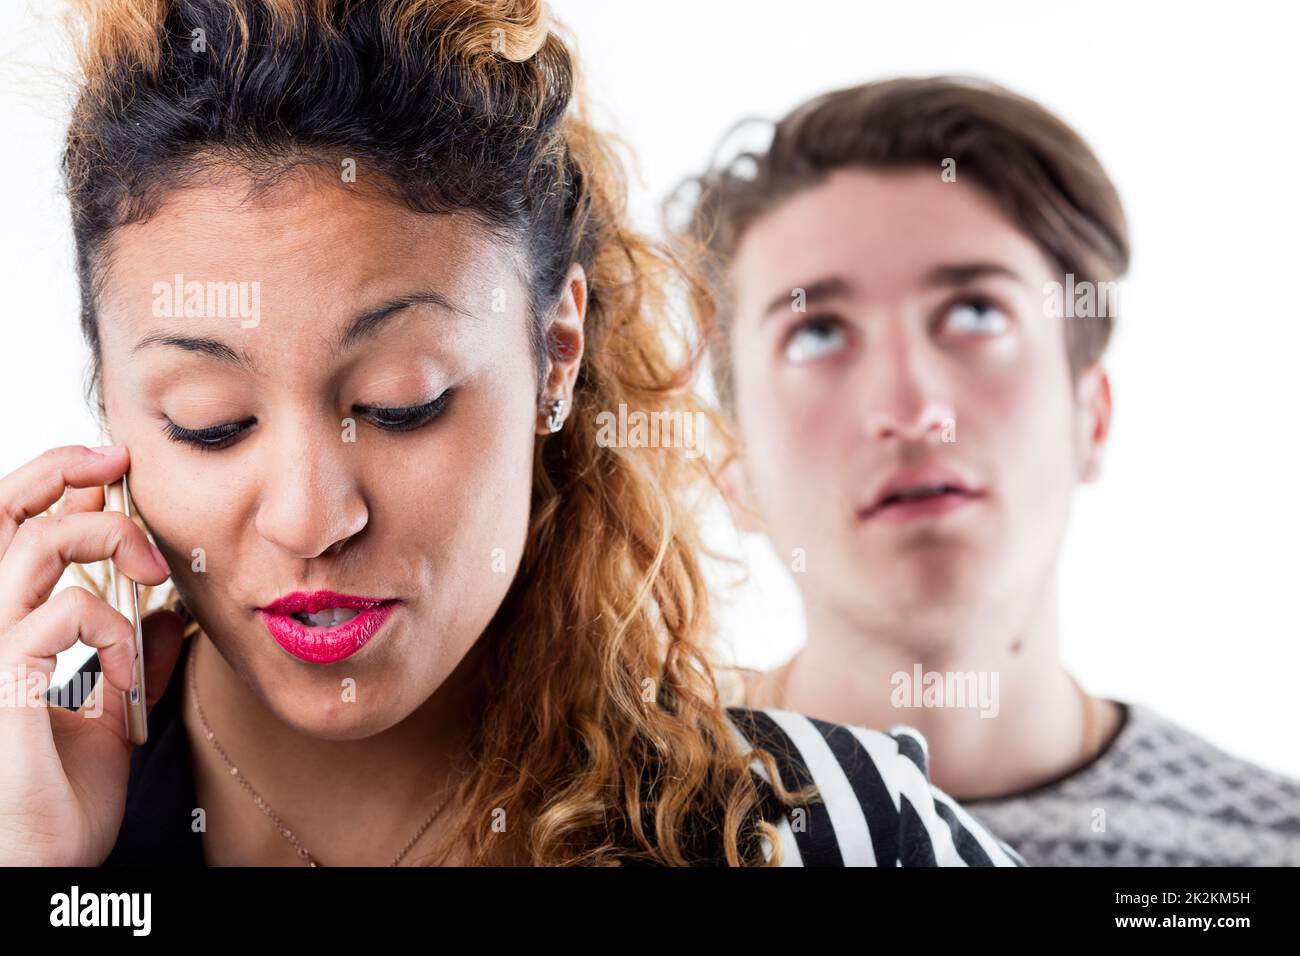 Bored man standing behind woman talking on phone Stock Photo